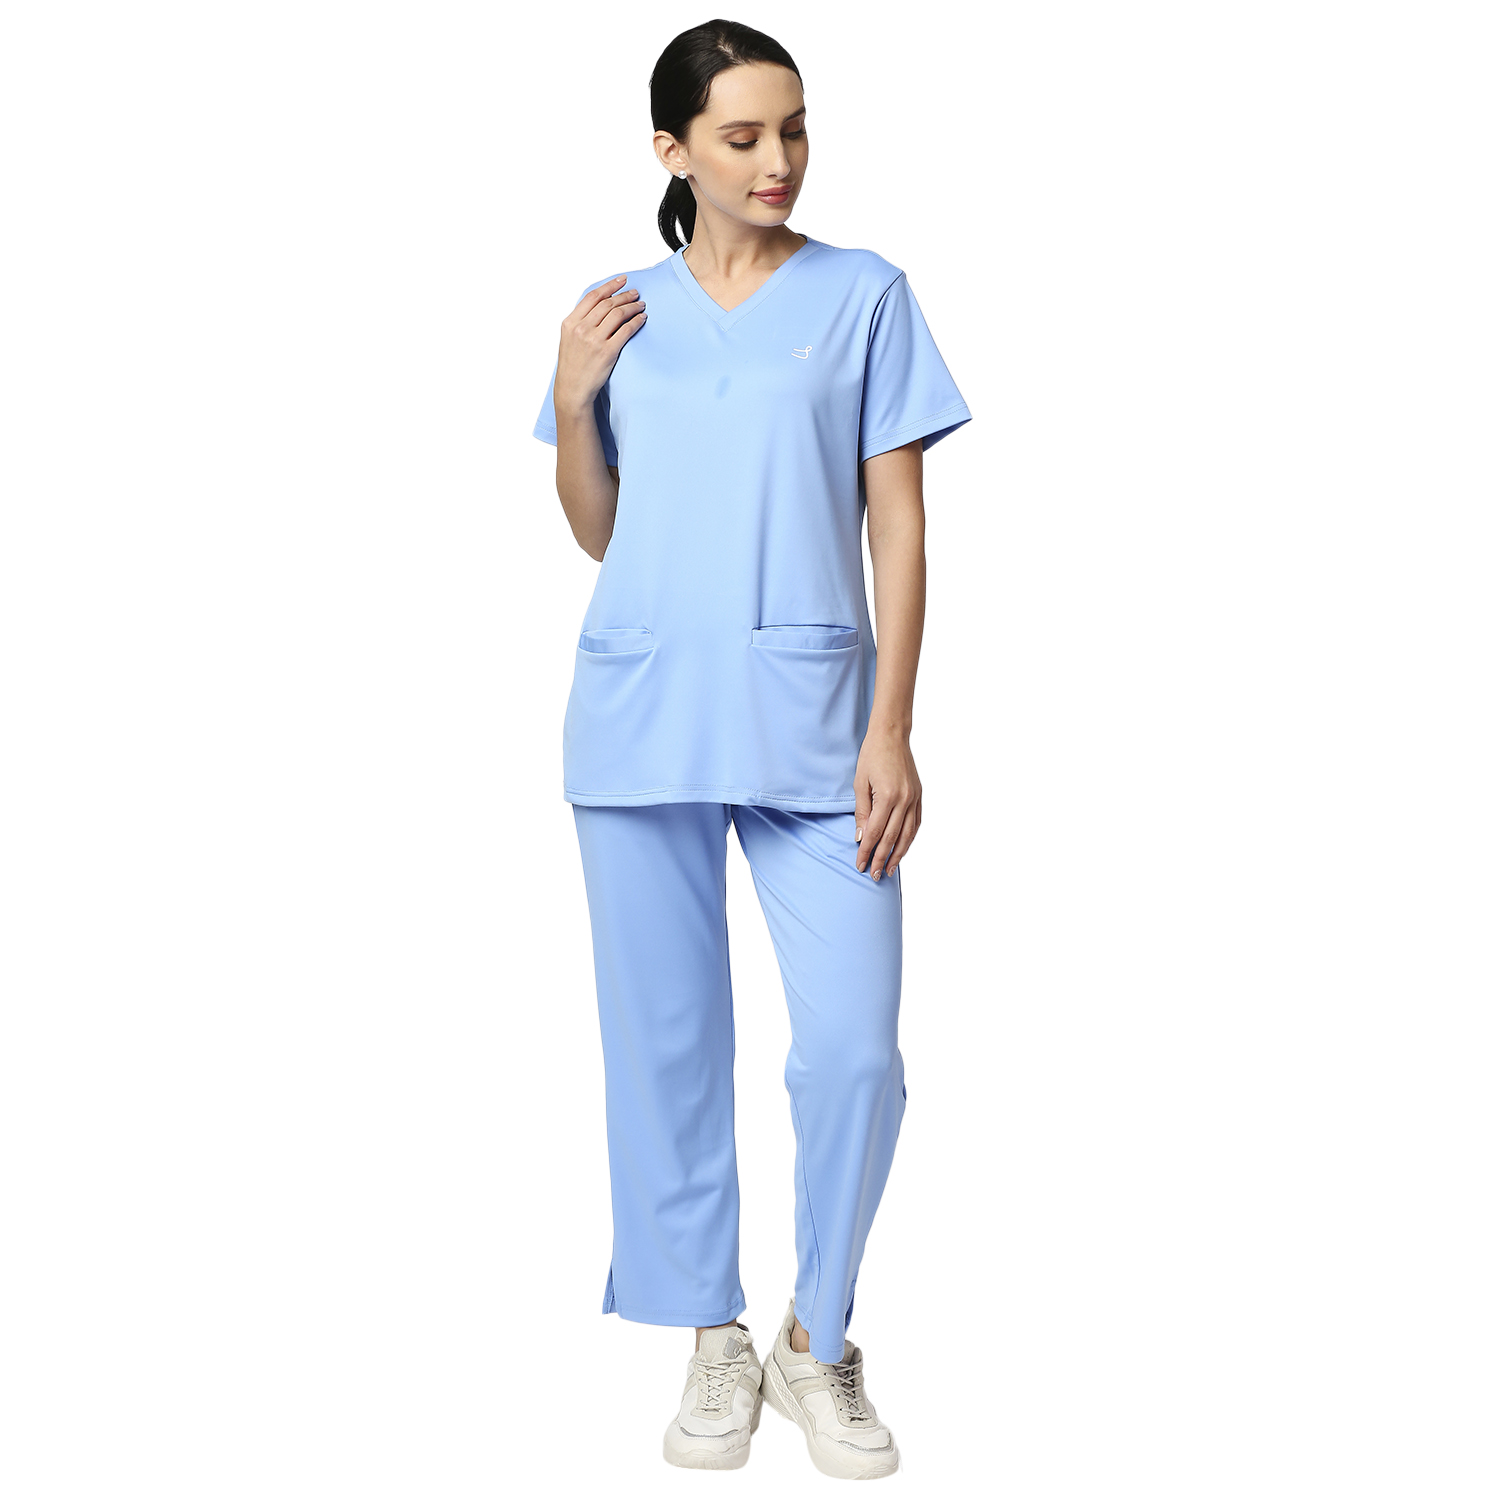 ot scrubs for doctors and nurses - Thermaissance